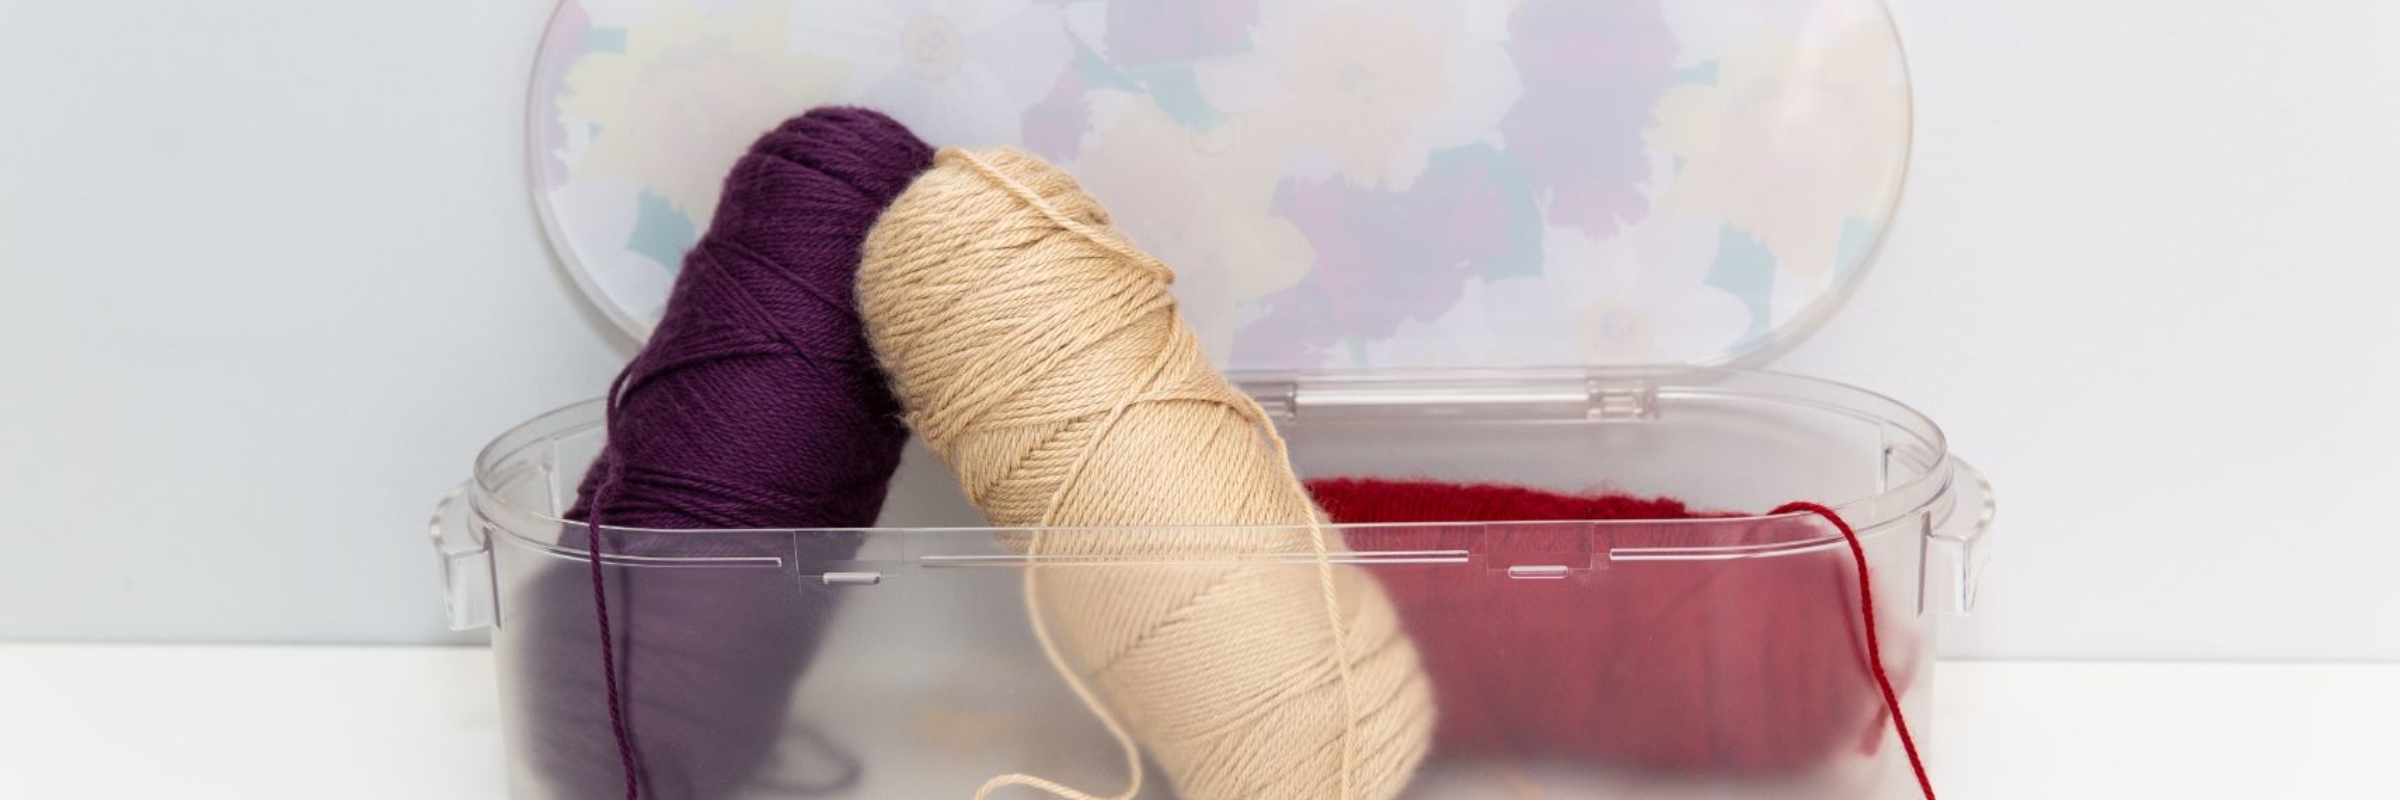 Nykia Designs - Koribox for Crafting, Sewing, and Knitting Storage